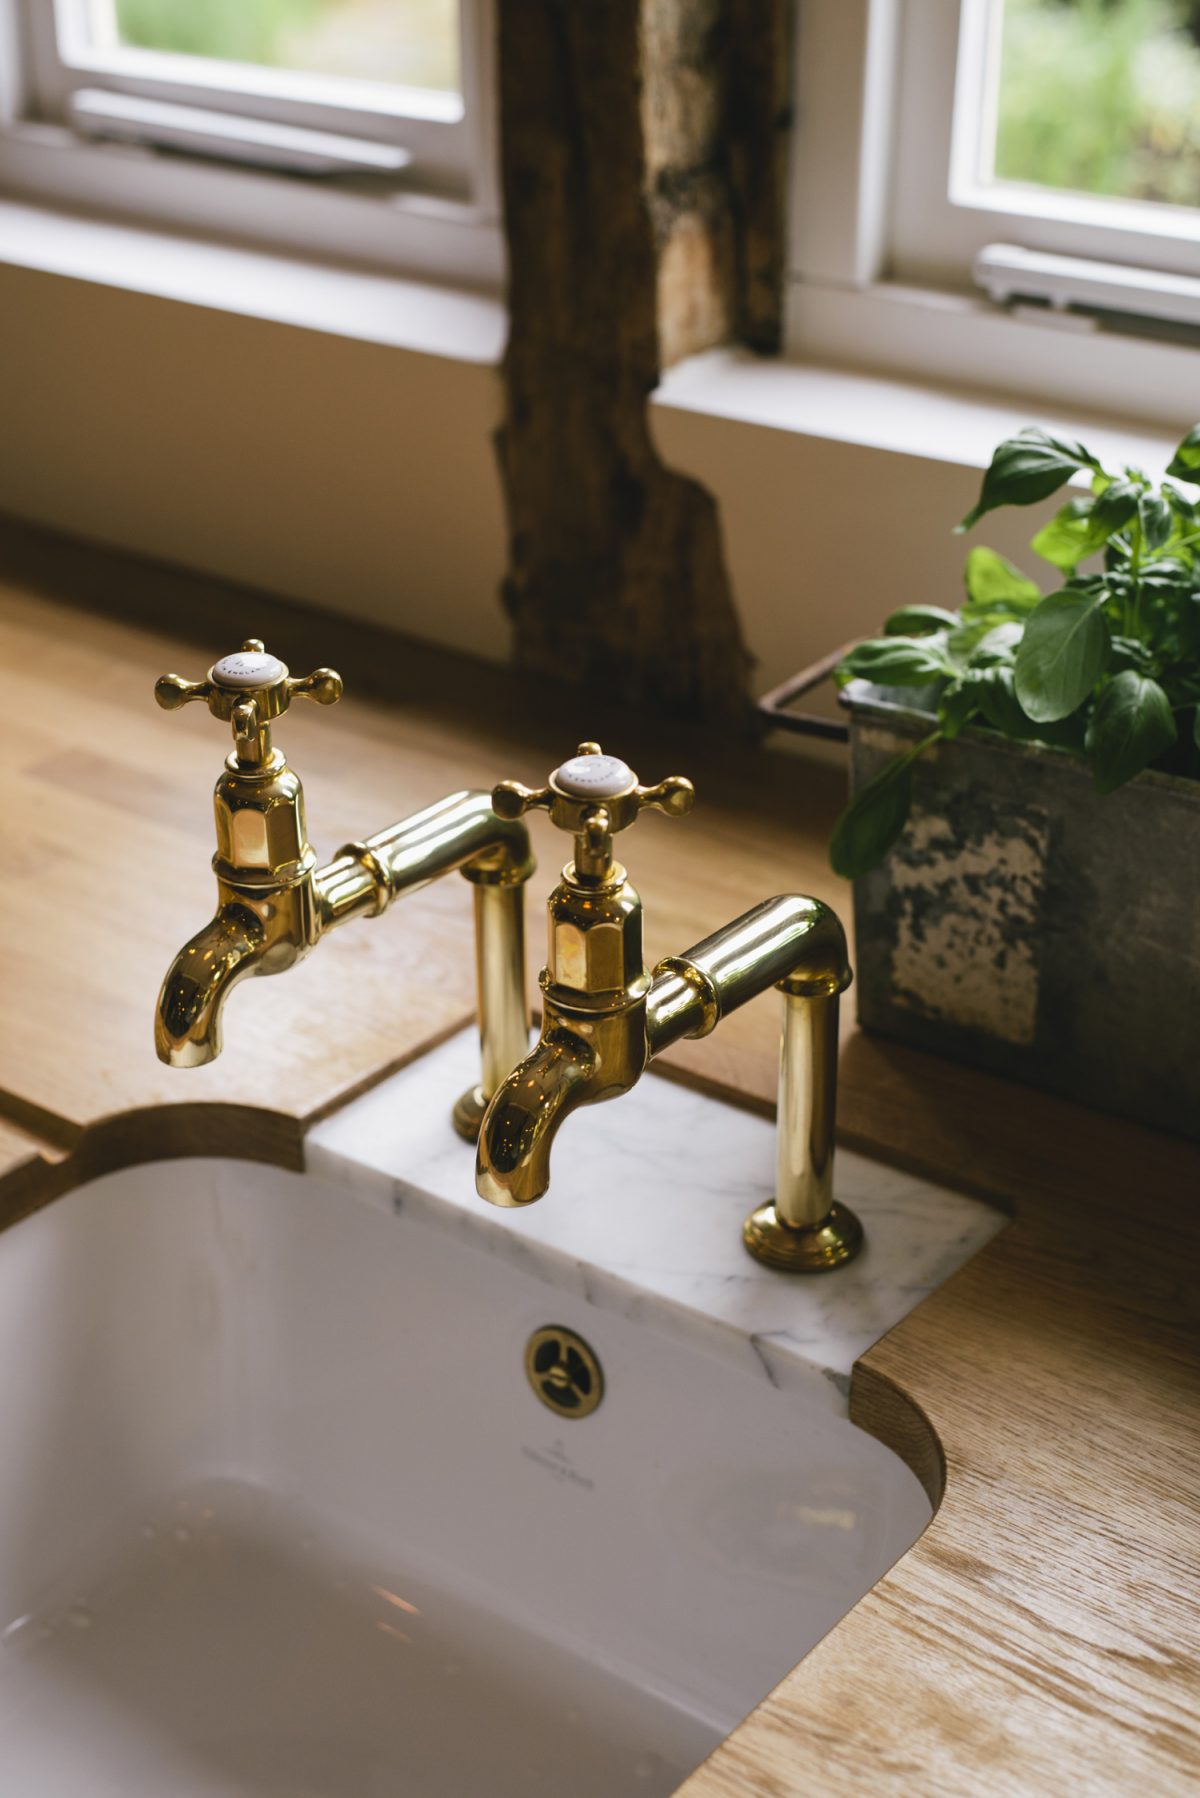 A pair of Aged Brass Mayan Taps set into a Carrara marble insert to prevent water damage.